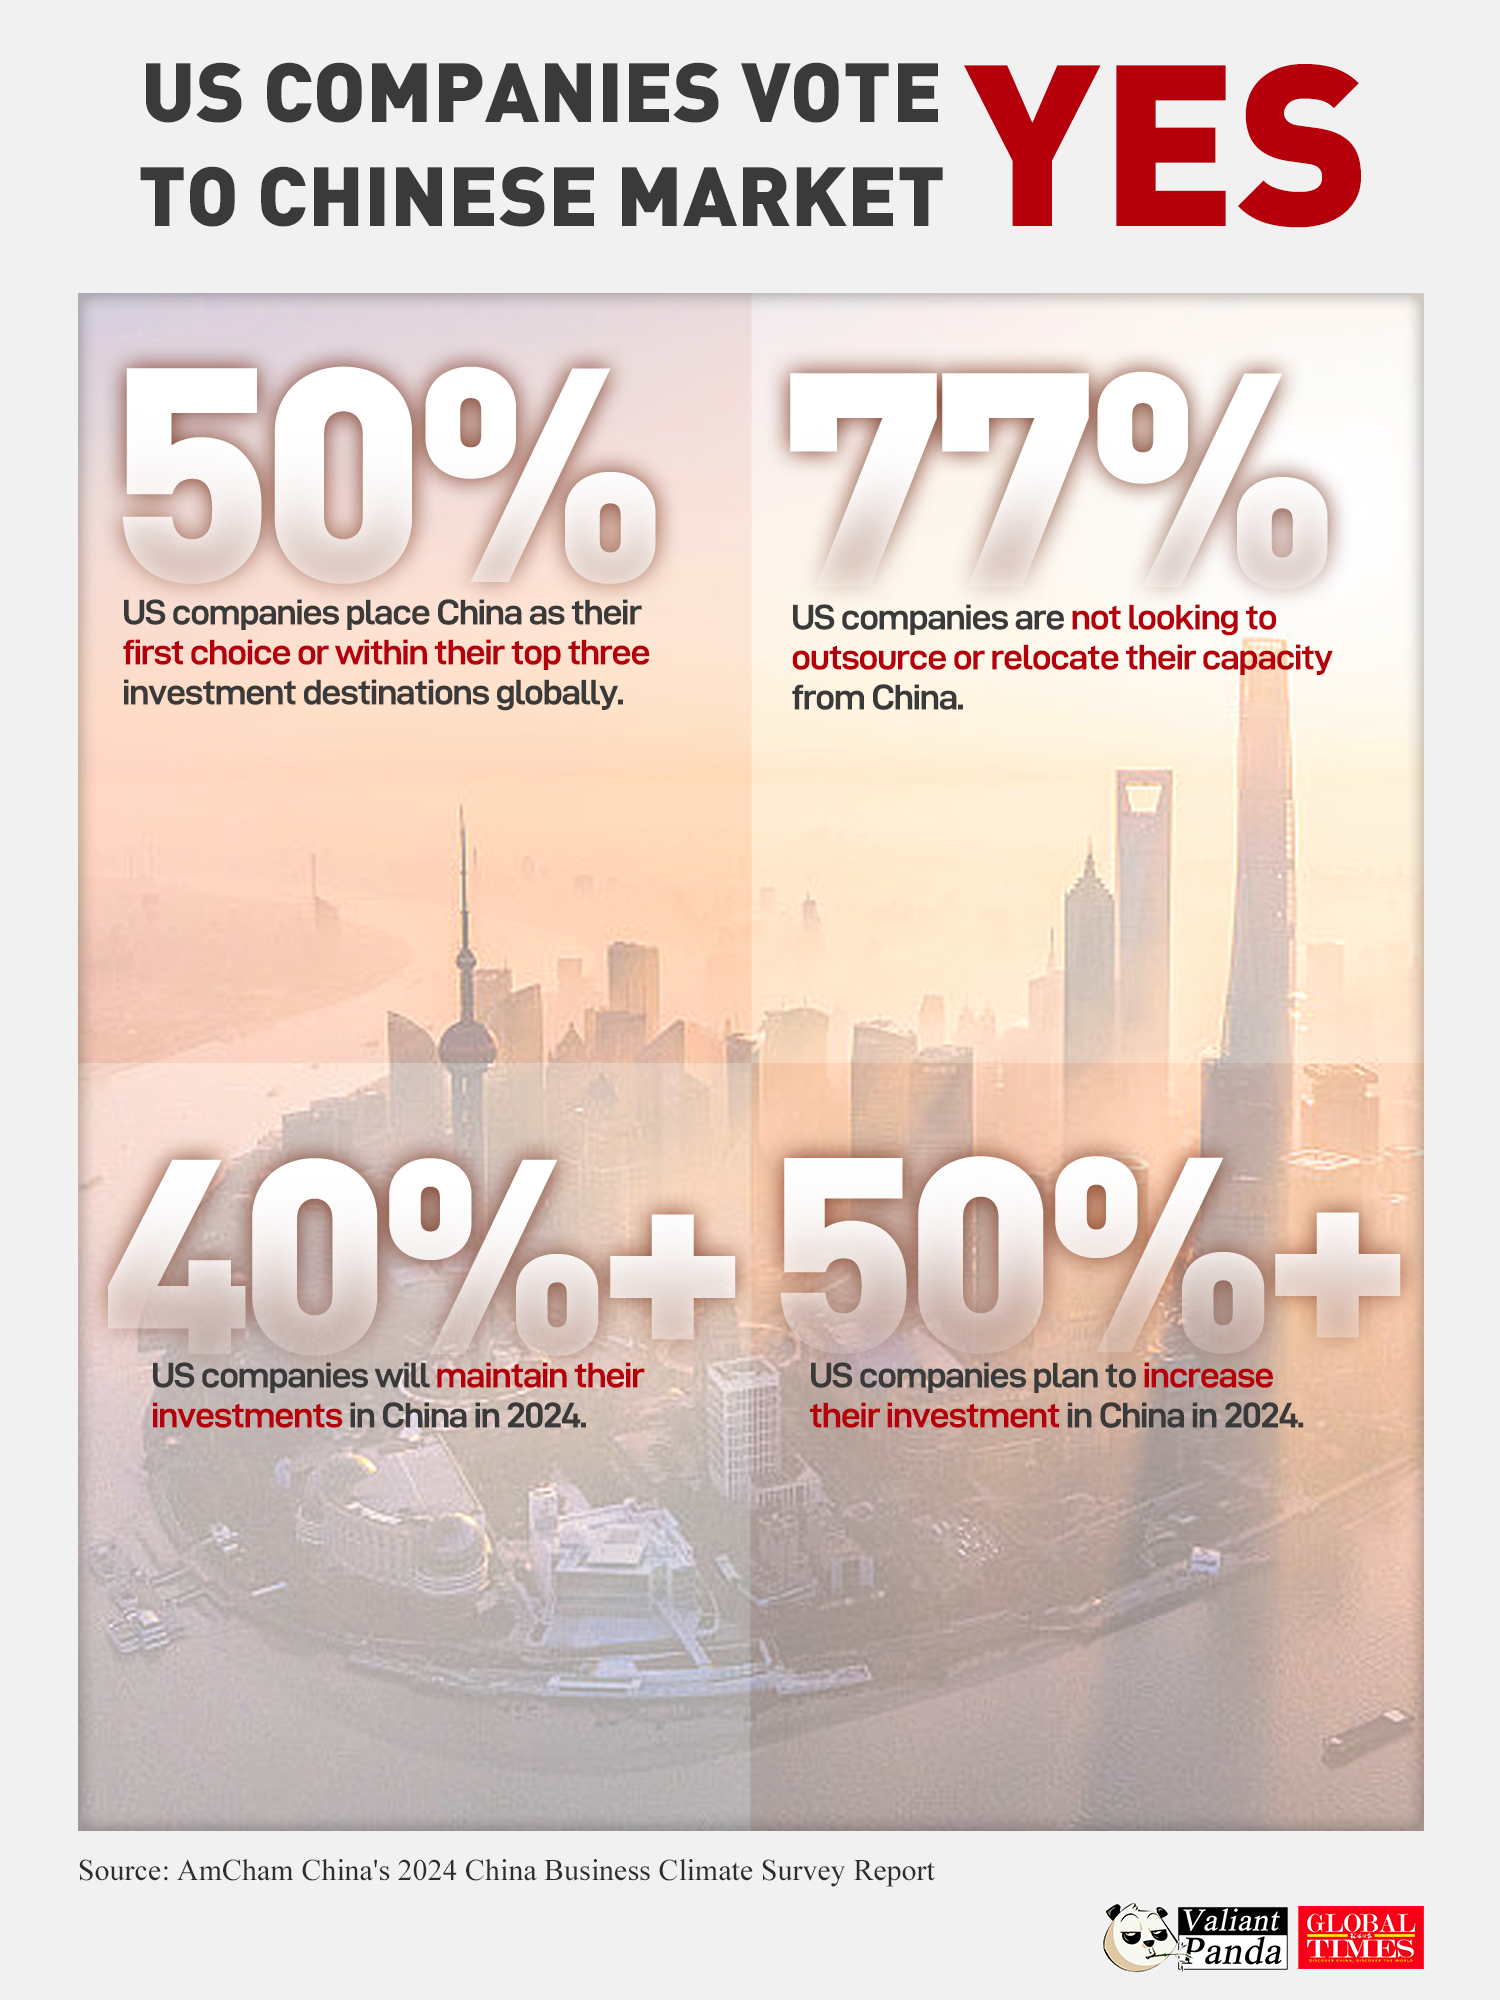 Foreign companies leaving China? Despite speculations, 50% of US companies still consider China among the world’s top three investment destinations, with 77% having no plans to move out. Graphic: GT